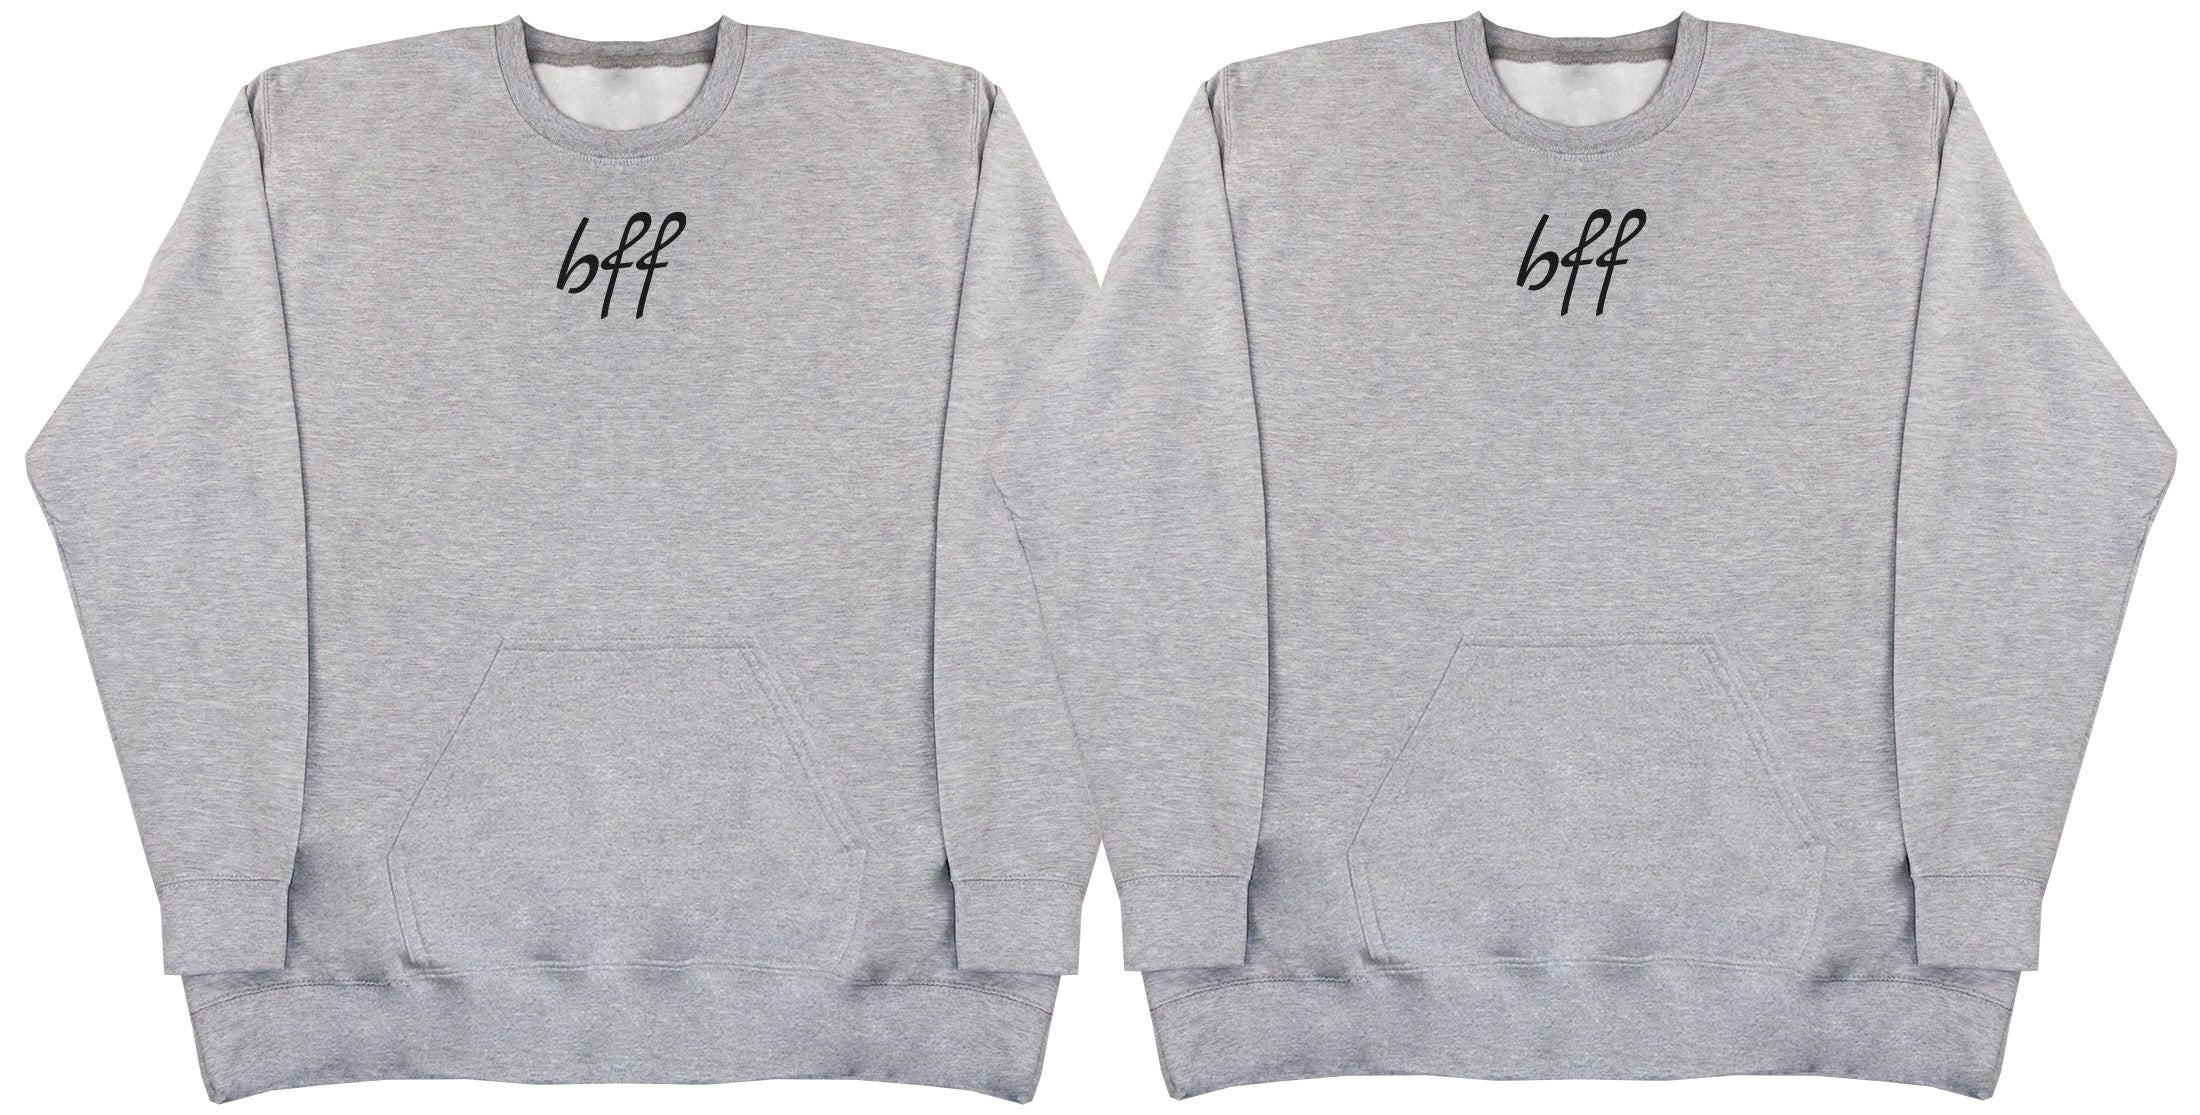 BFF Matching Set - Huge Oversized Comfy Sweater